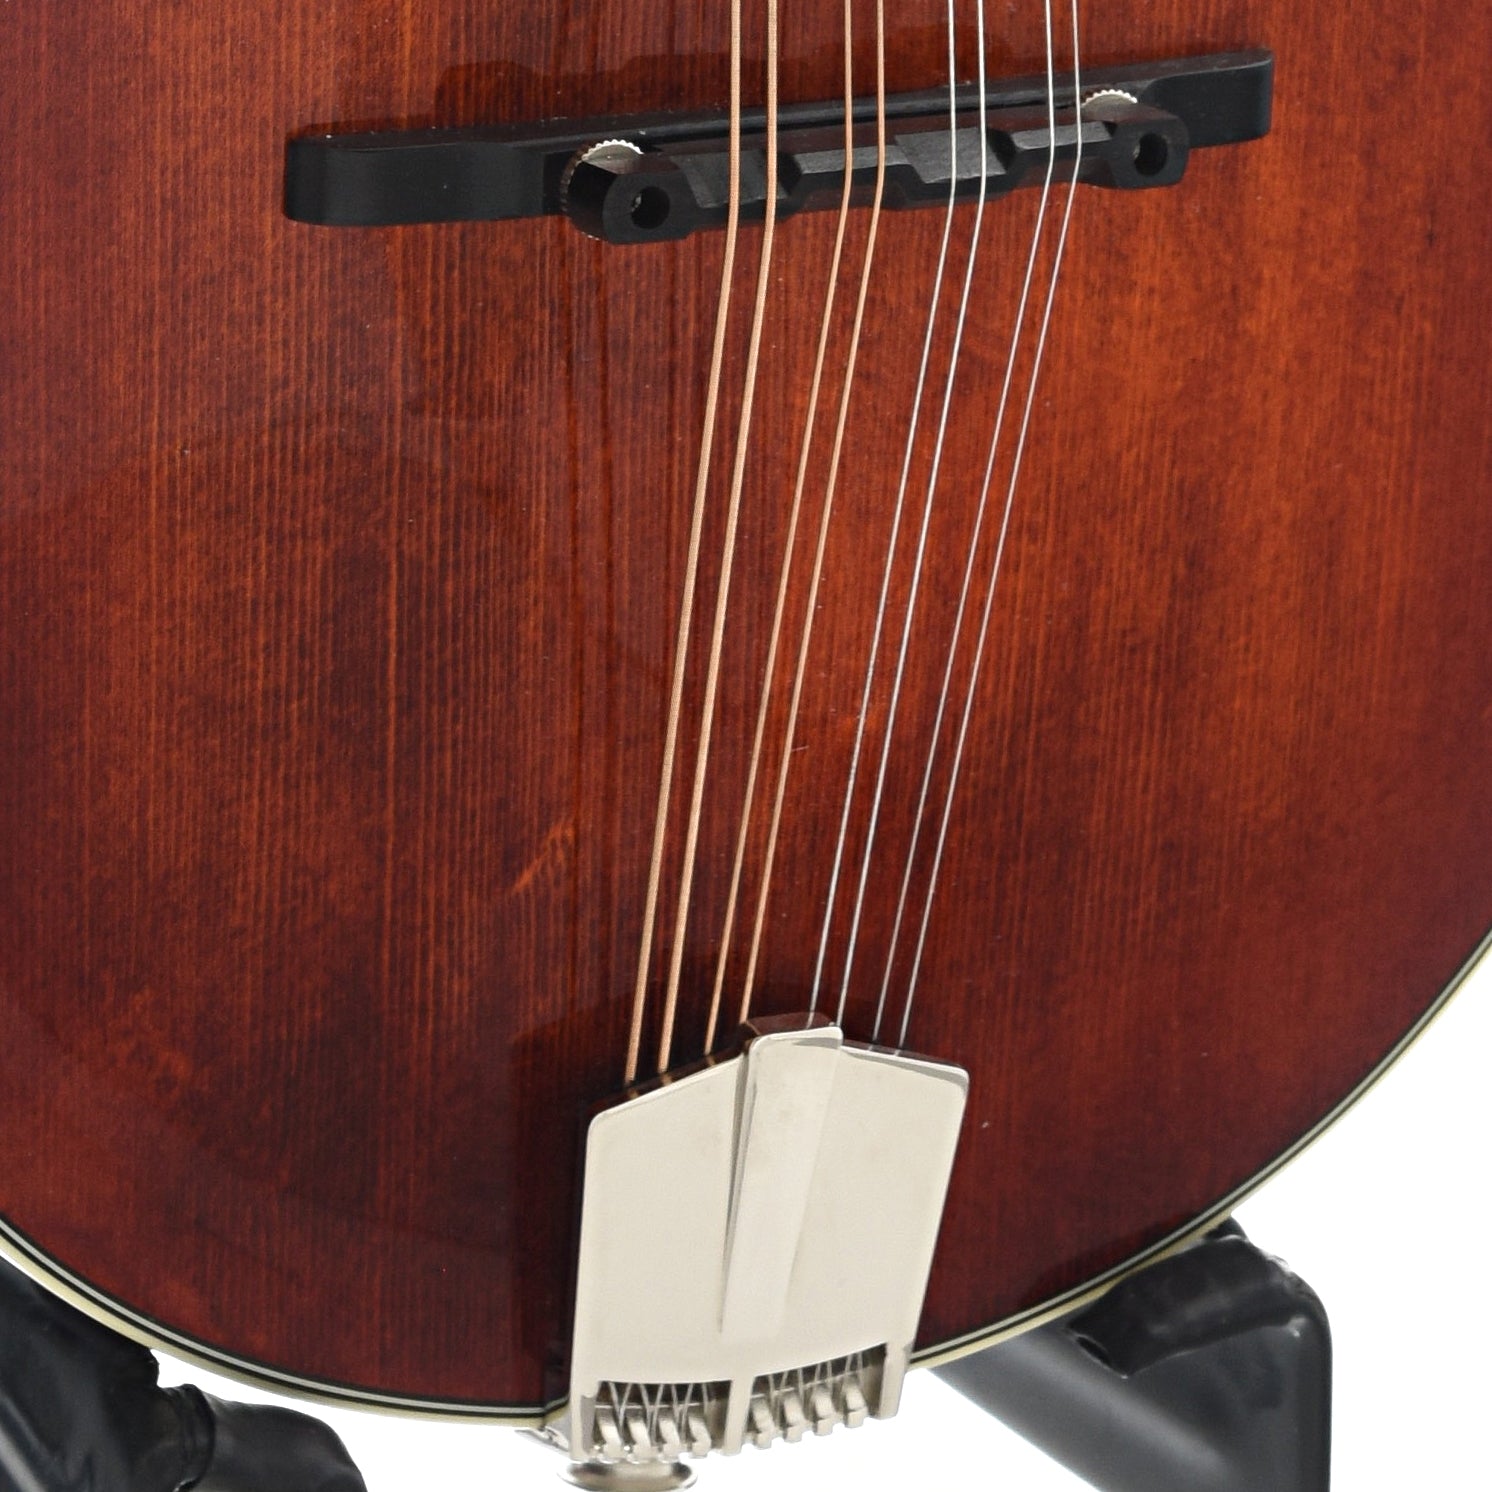 Tailpiece and bridge of Eastman MD604 Classic Mandolin